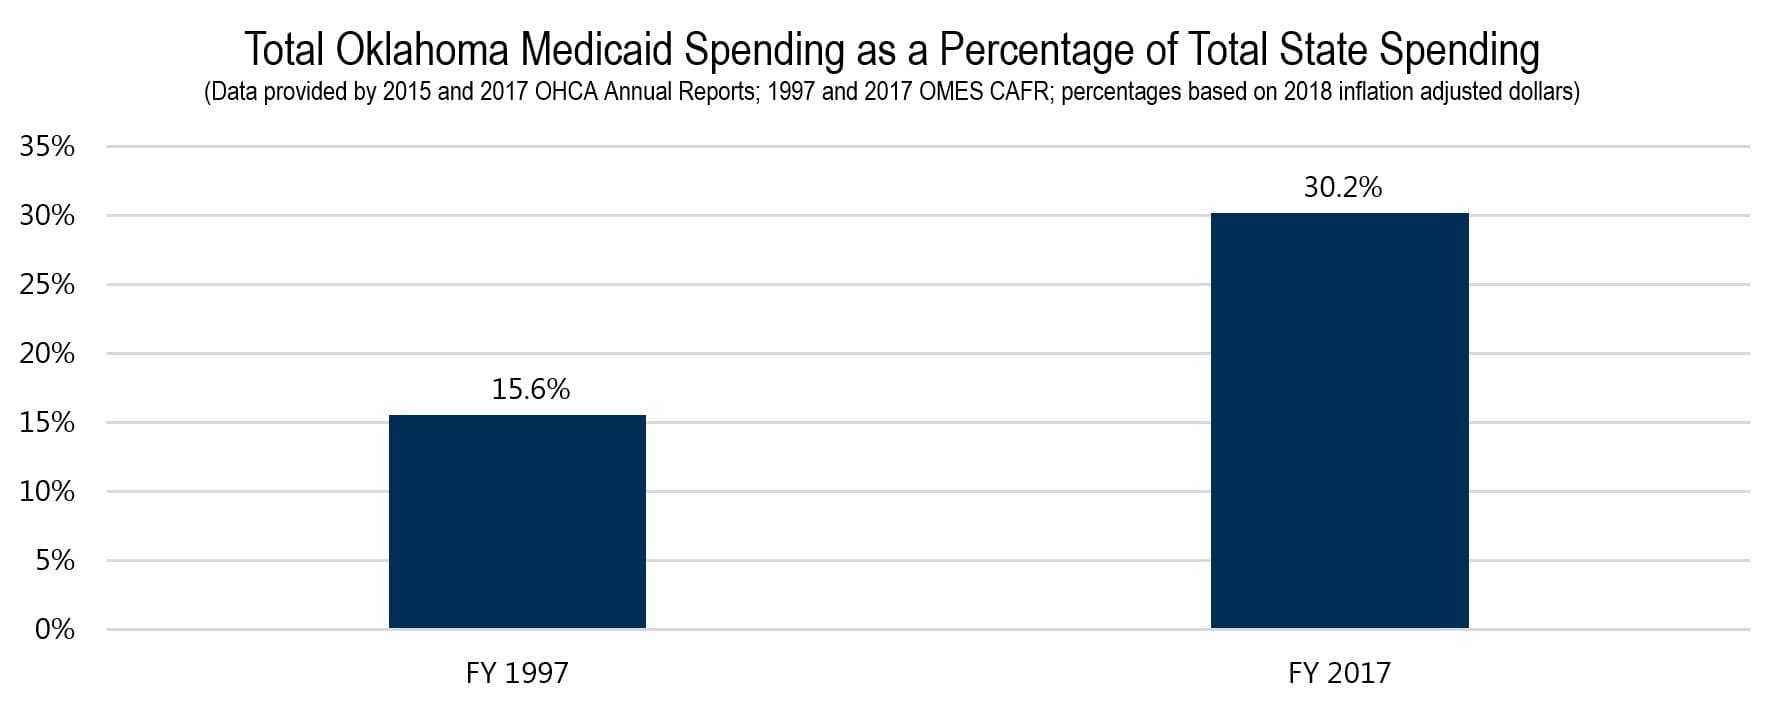 Total Oklahoma Medicaid Spending as a Percentage of Total State Spending